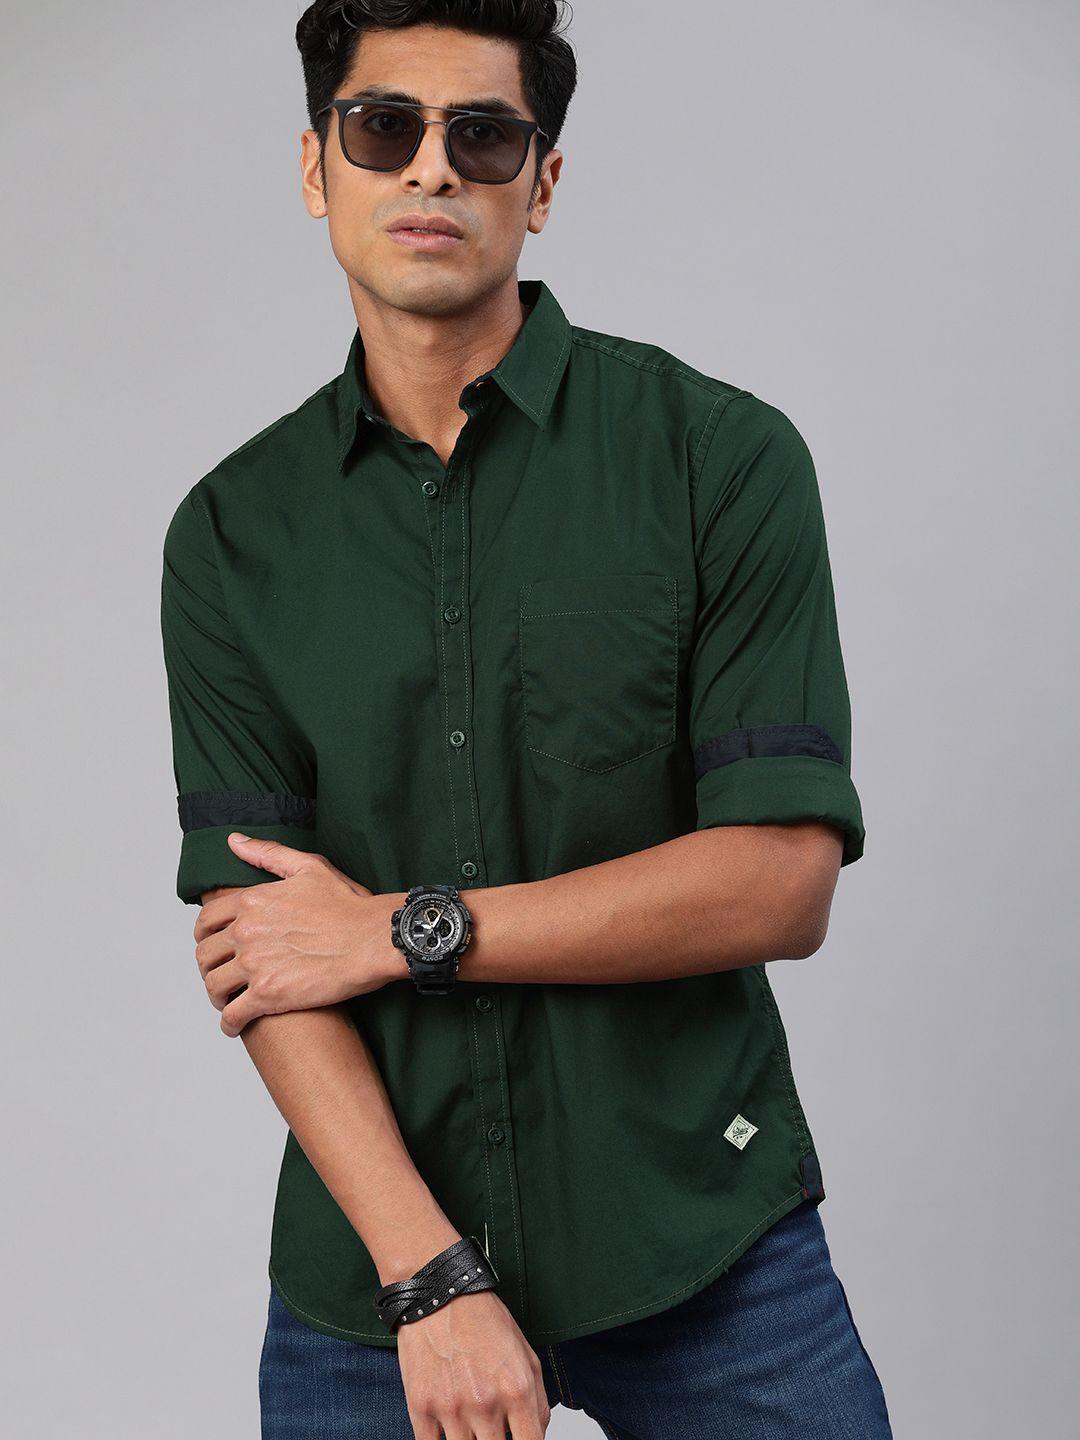 roadster men teal green regular fit solid sustainable casual shirt